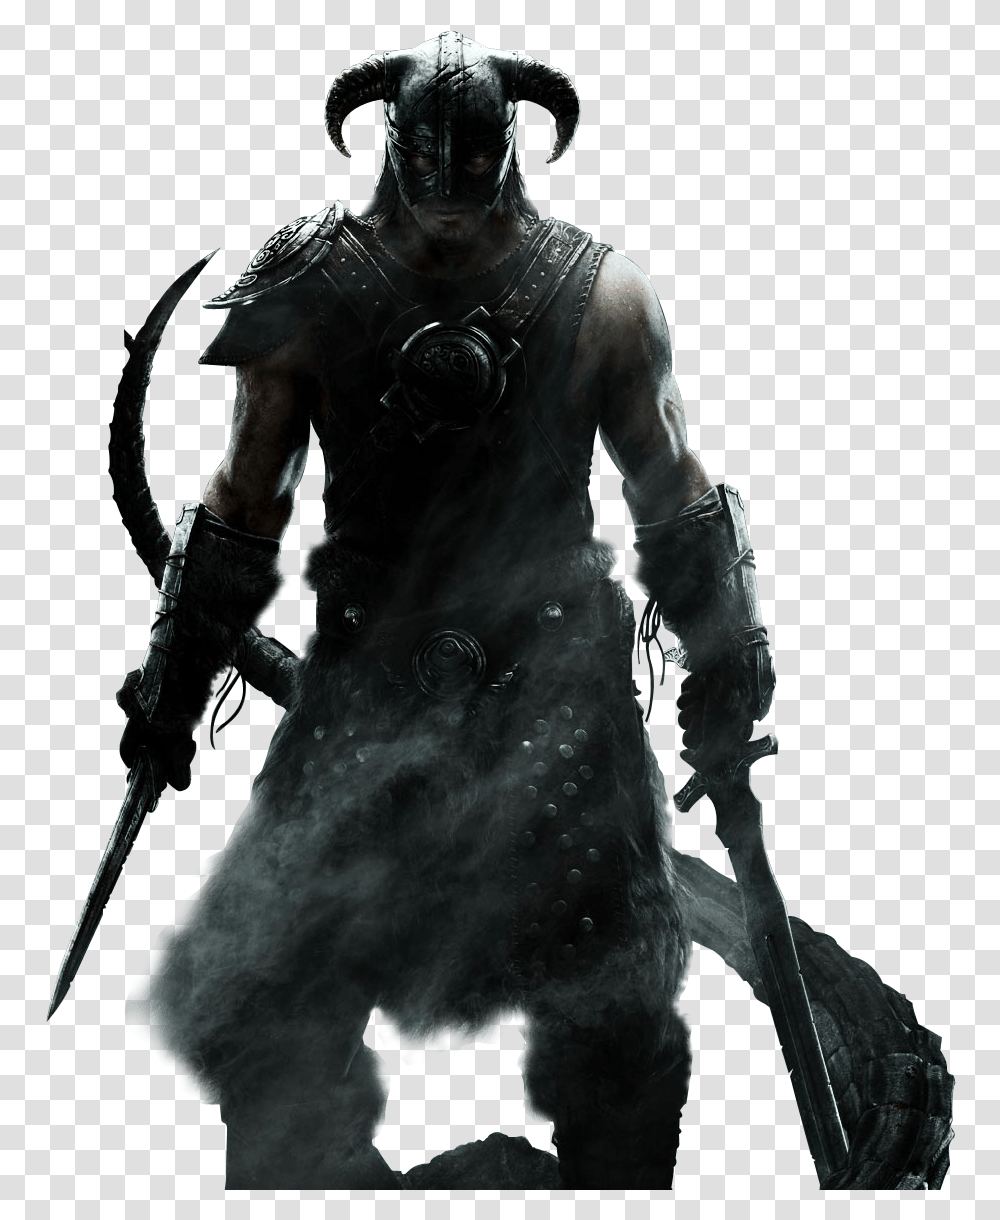 Elder Scrolls Skyrim Warrior Gaming Posters Black And White, Person, Human, Horse, Mammal Transparent Png